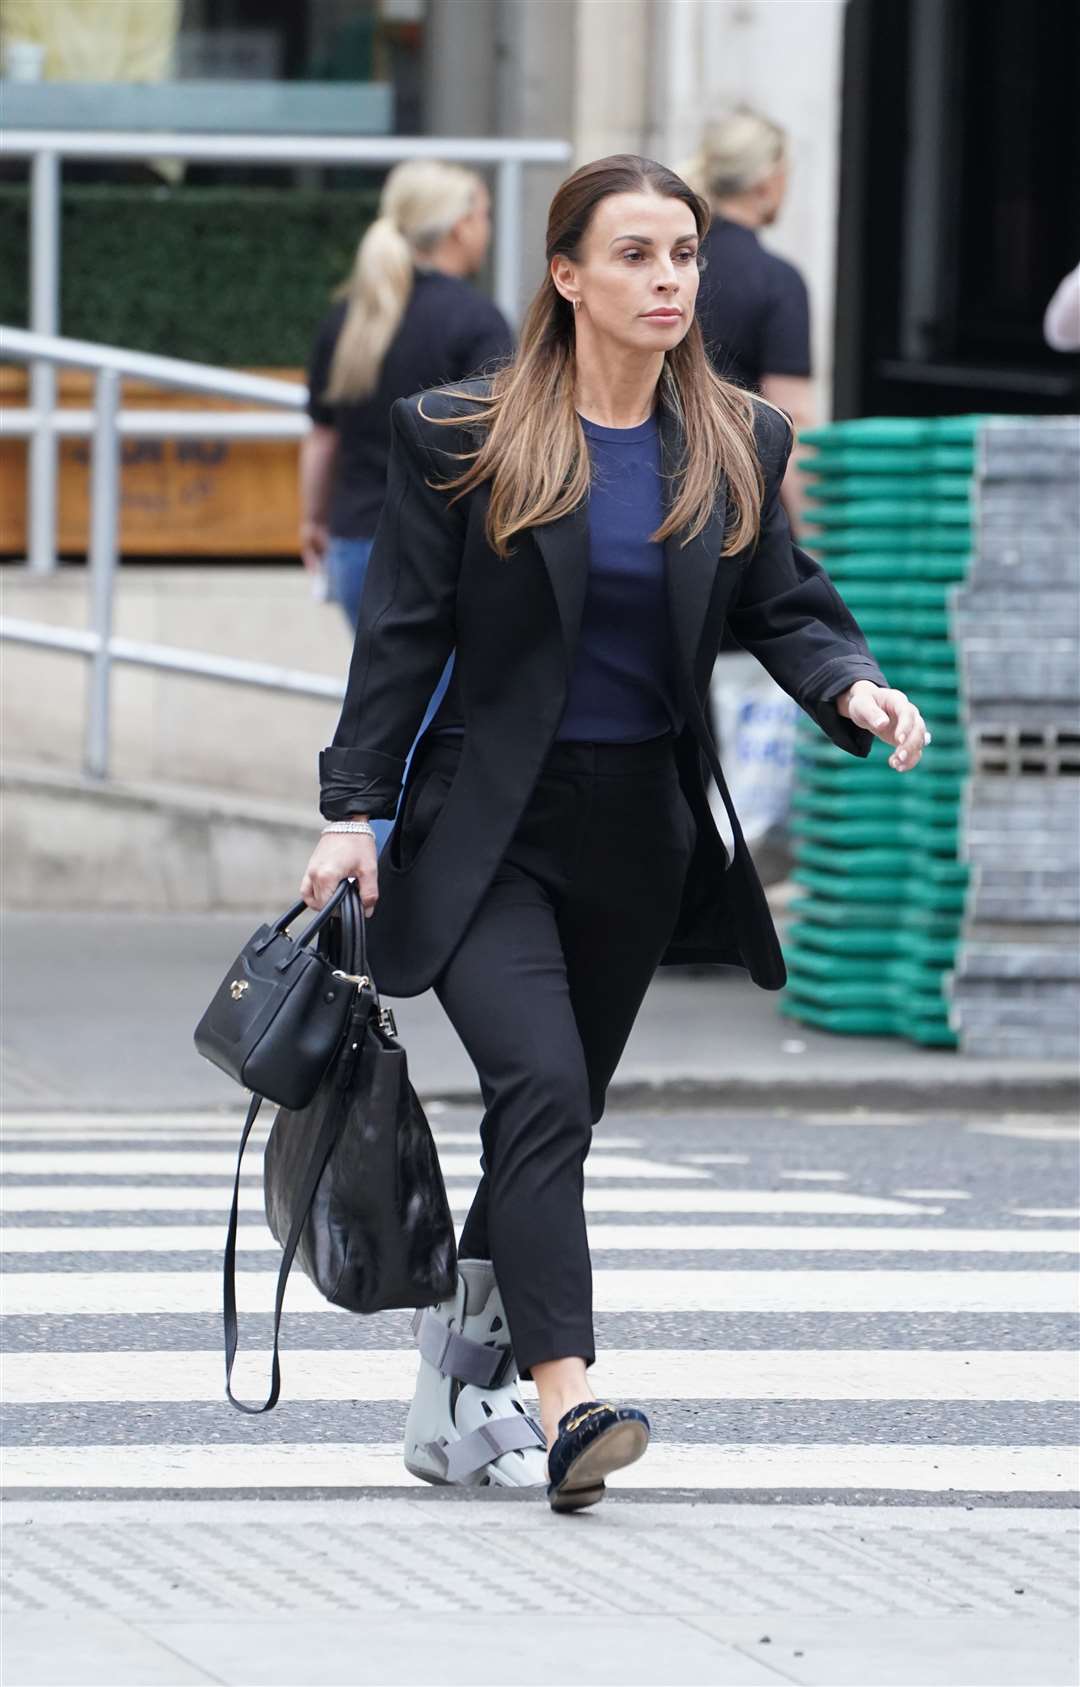 Coleen Rooney arrives at the Royal Courts Of Justice, London (Ian West/PA)